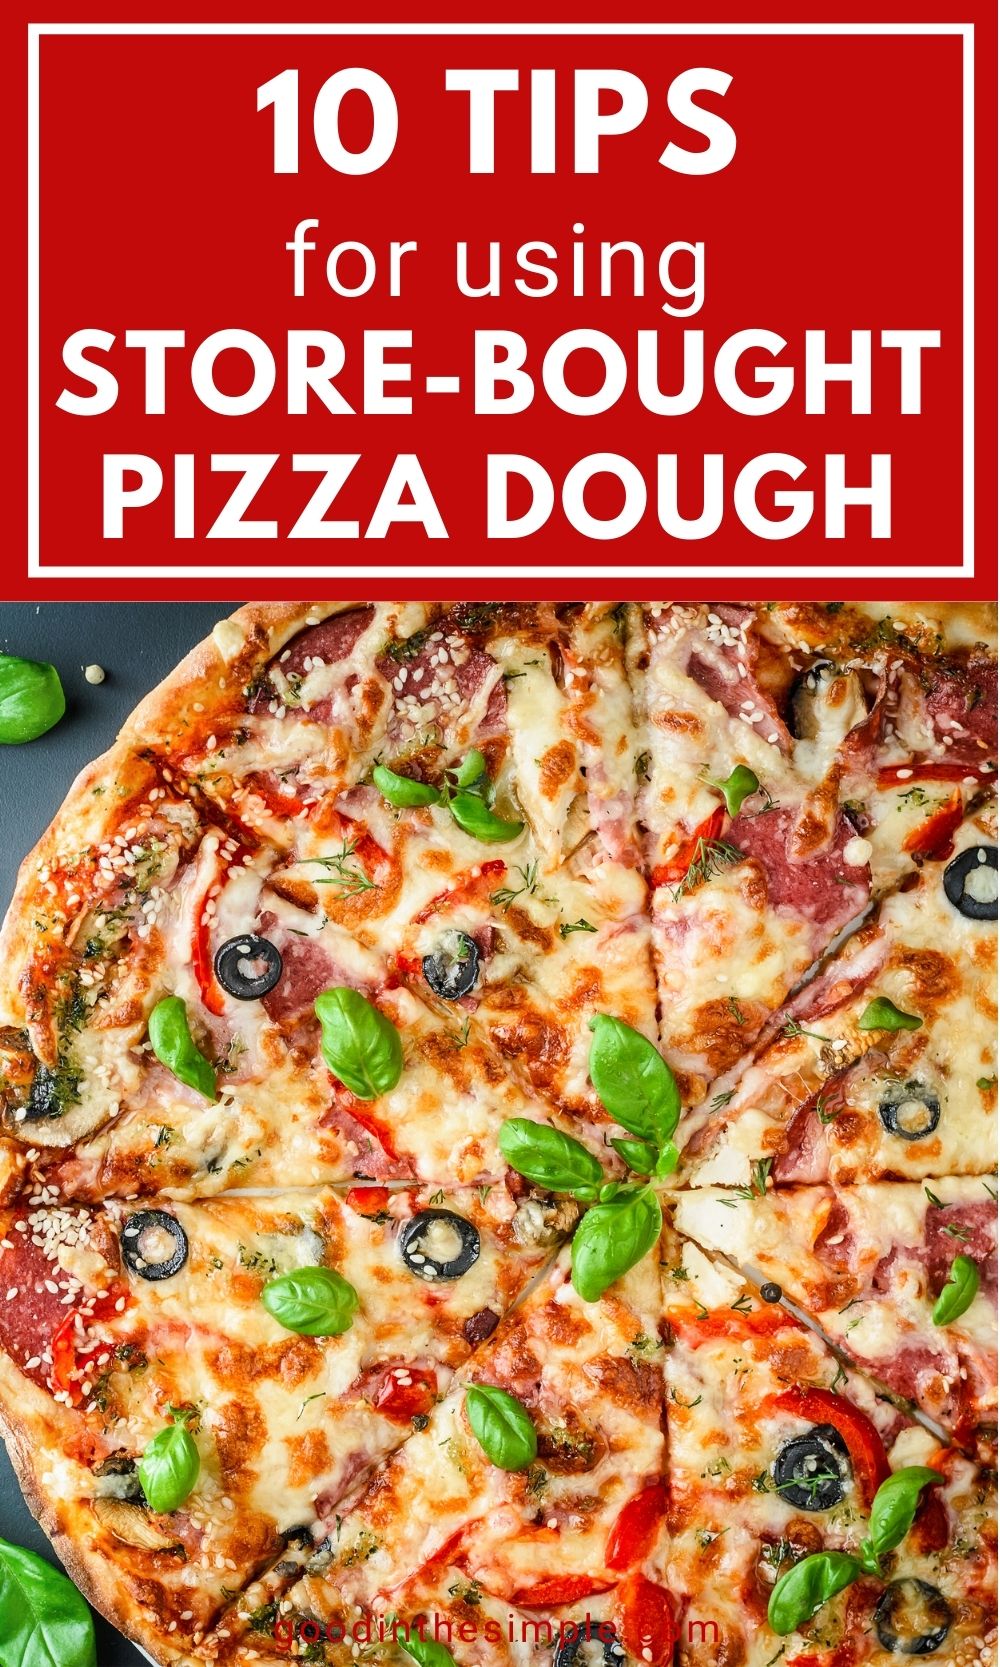 Pinterest image with text: 10 tips for using store-bought pizza dough